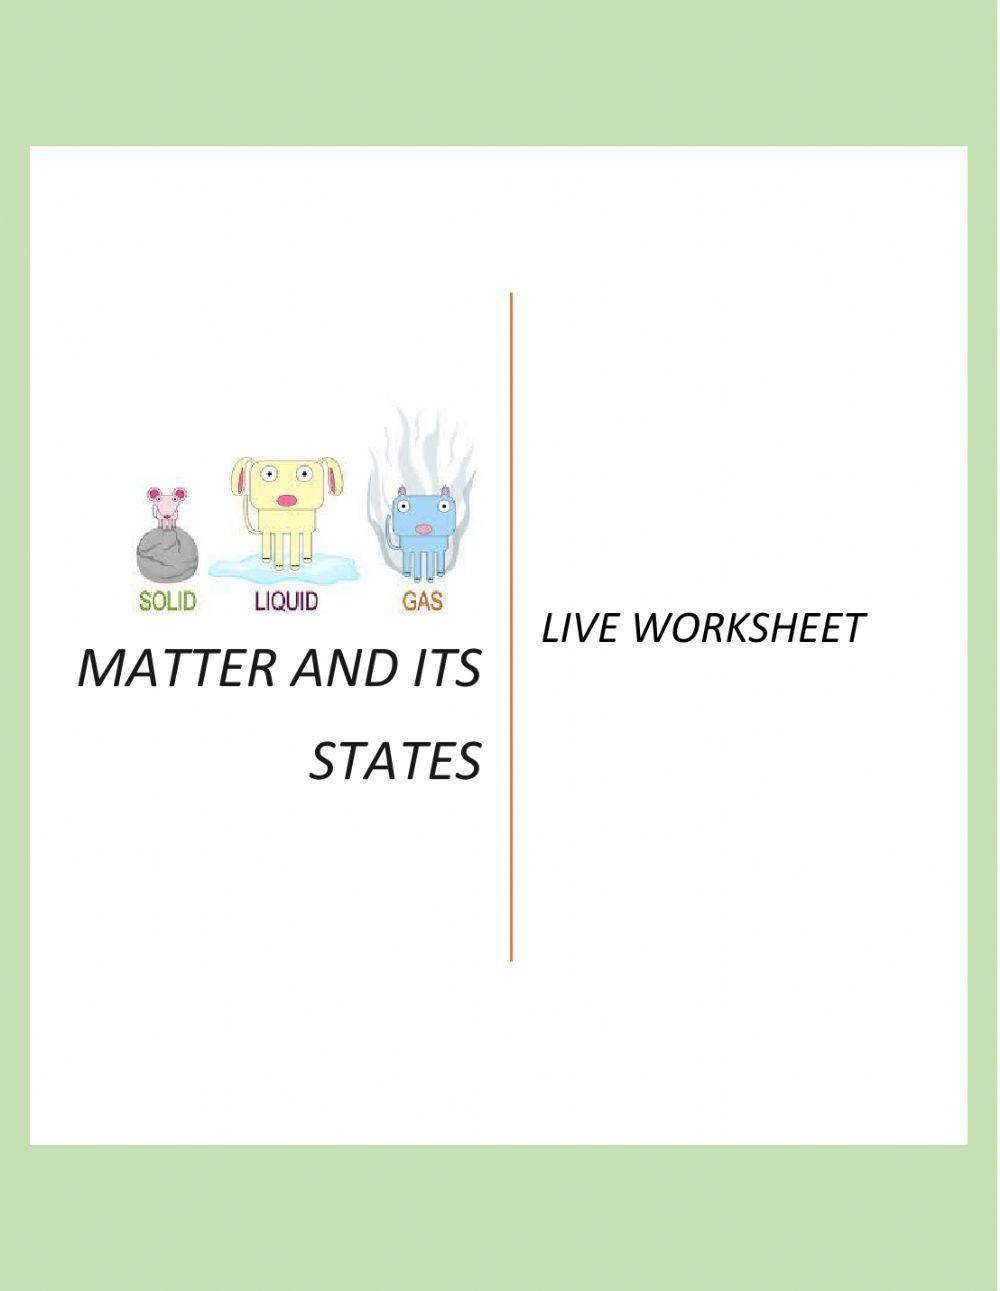 Matter and its states